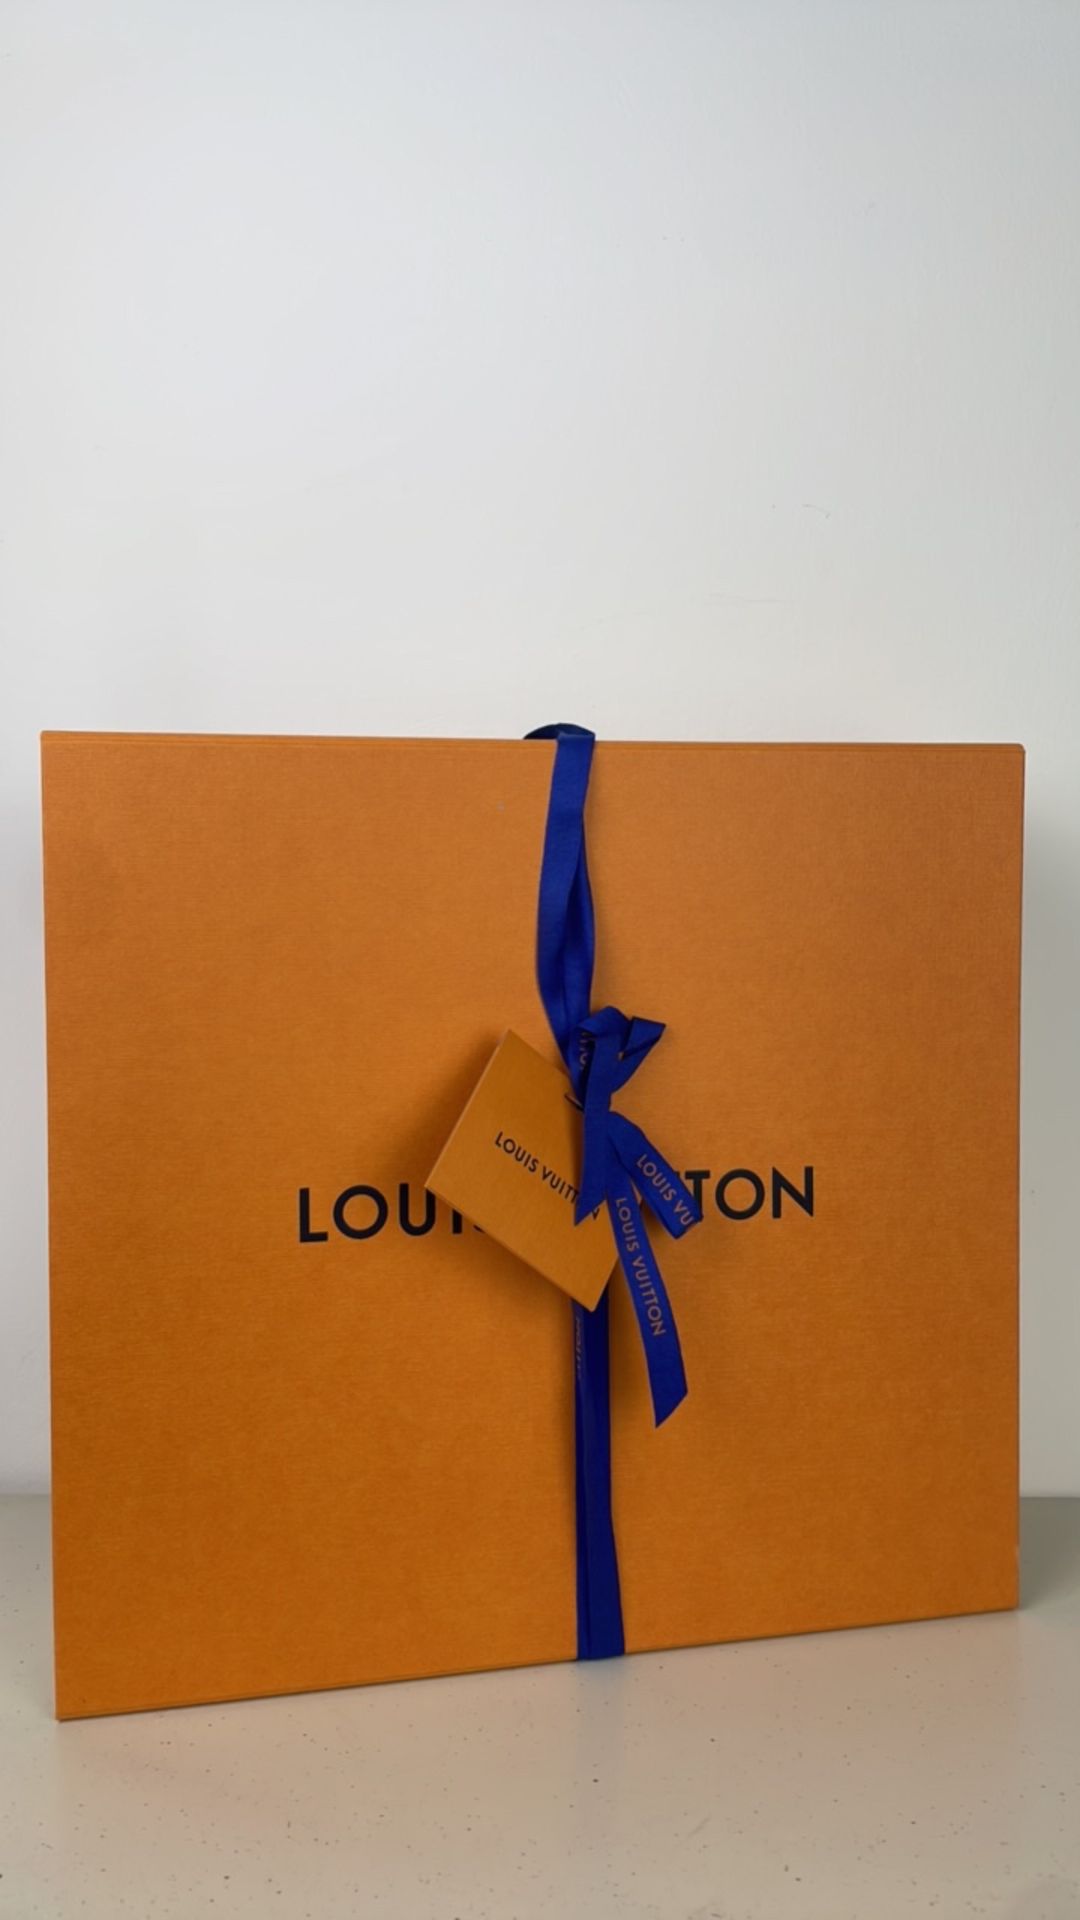 Louis Vuitton Neverfull - Image 5 of 5